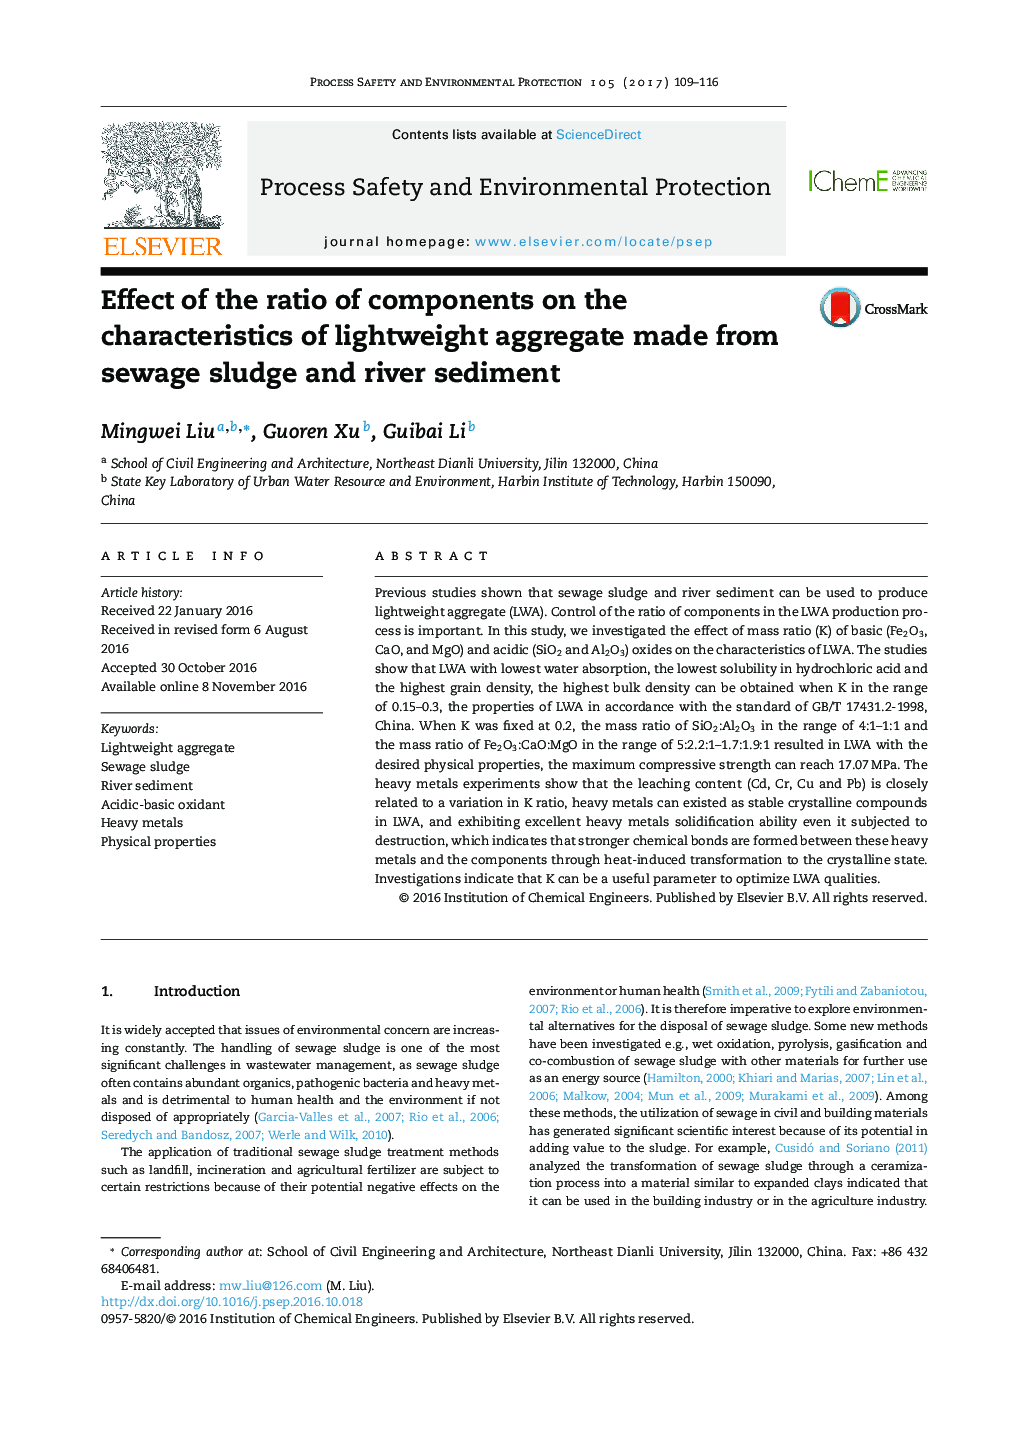 Effect of the ratio of components on the characteristics of lightweight aggregate made from sewage sludge and river sediment